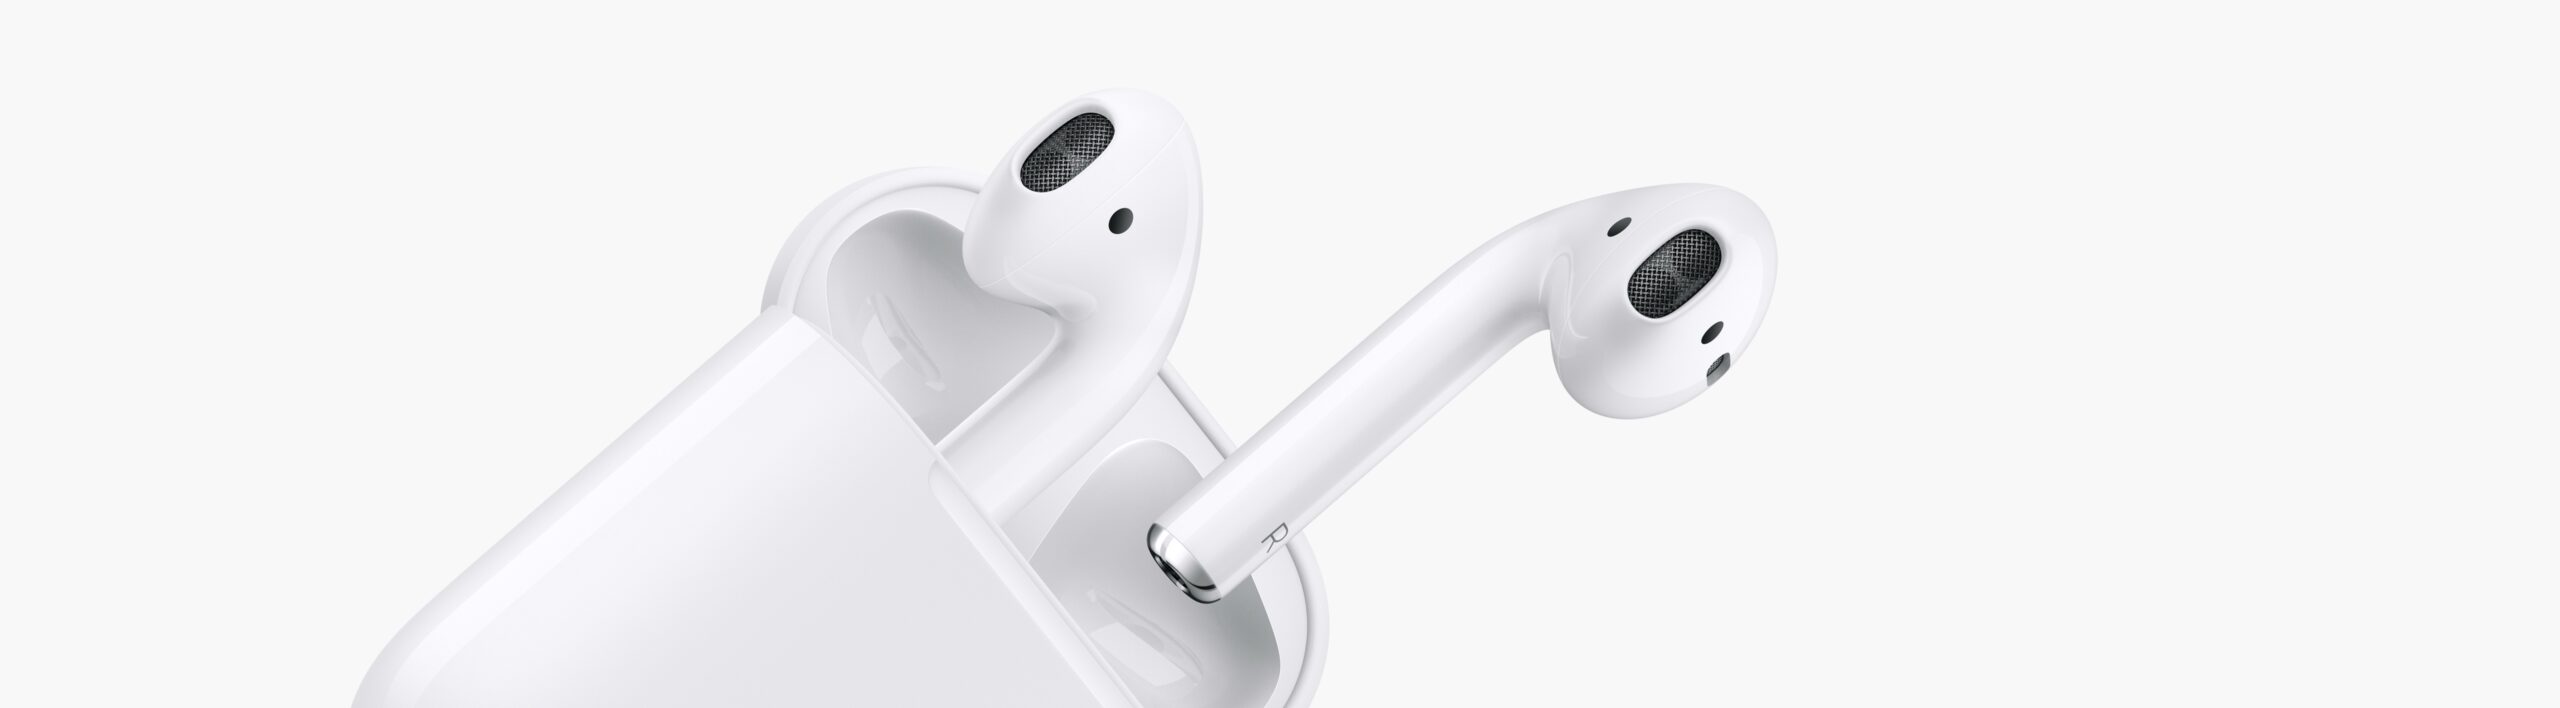 Inclined AirPods